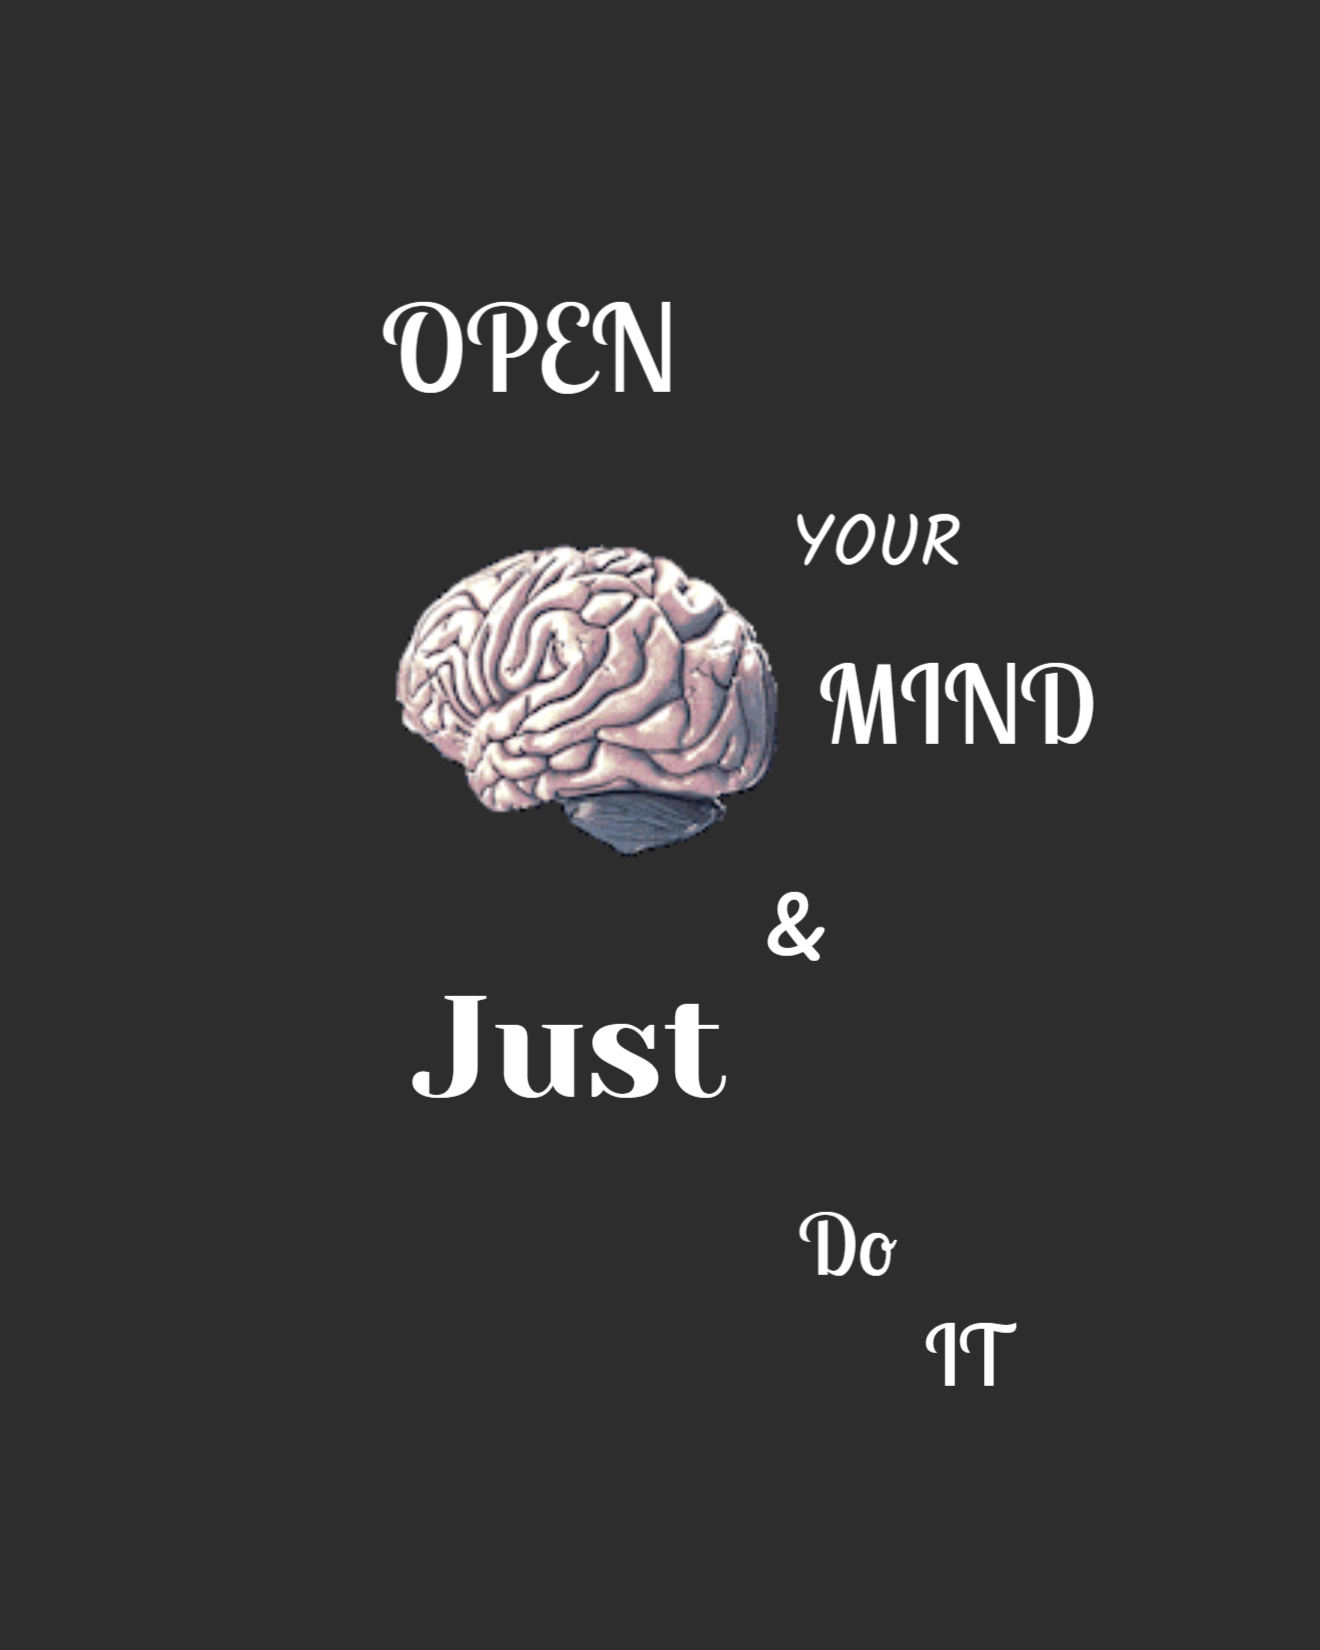 open your mind & just do it